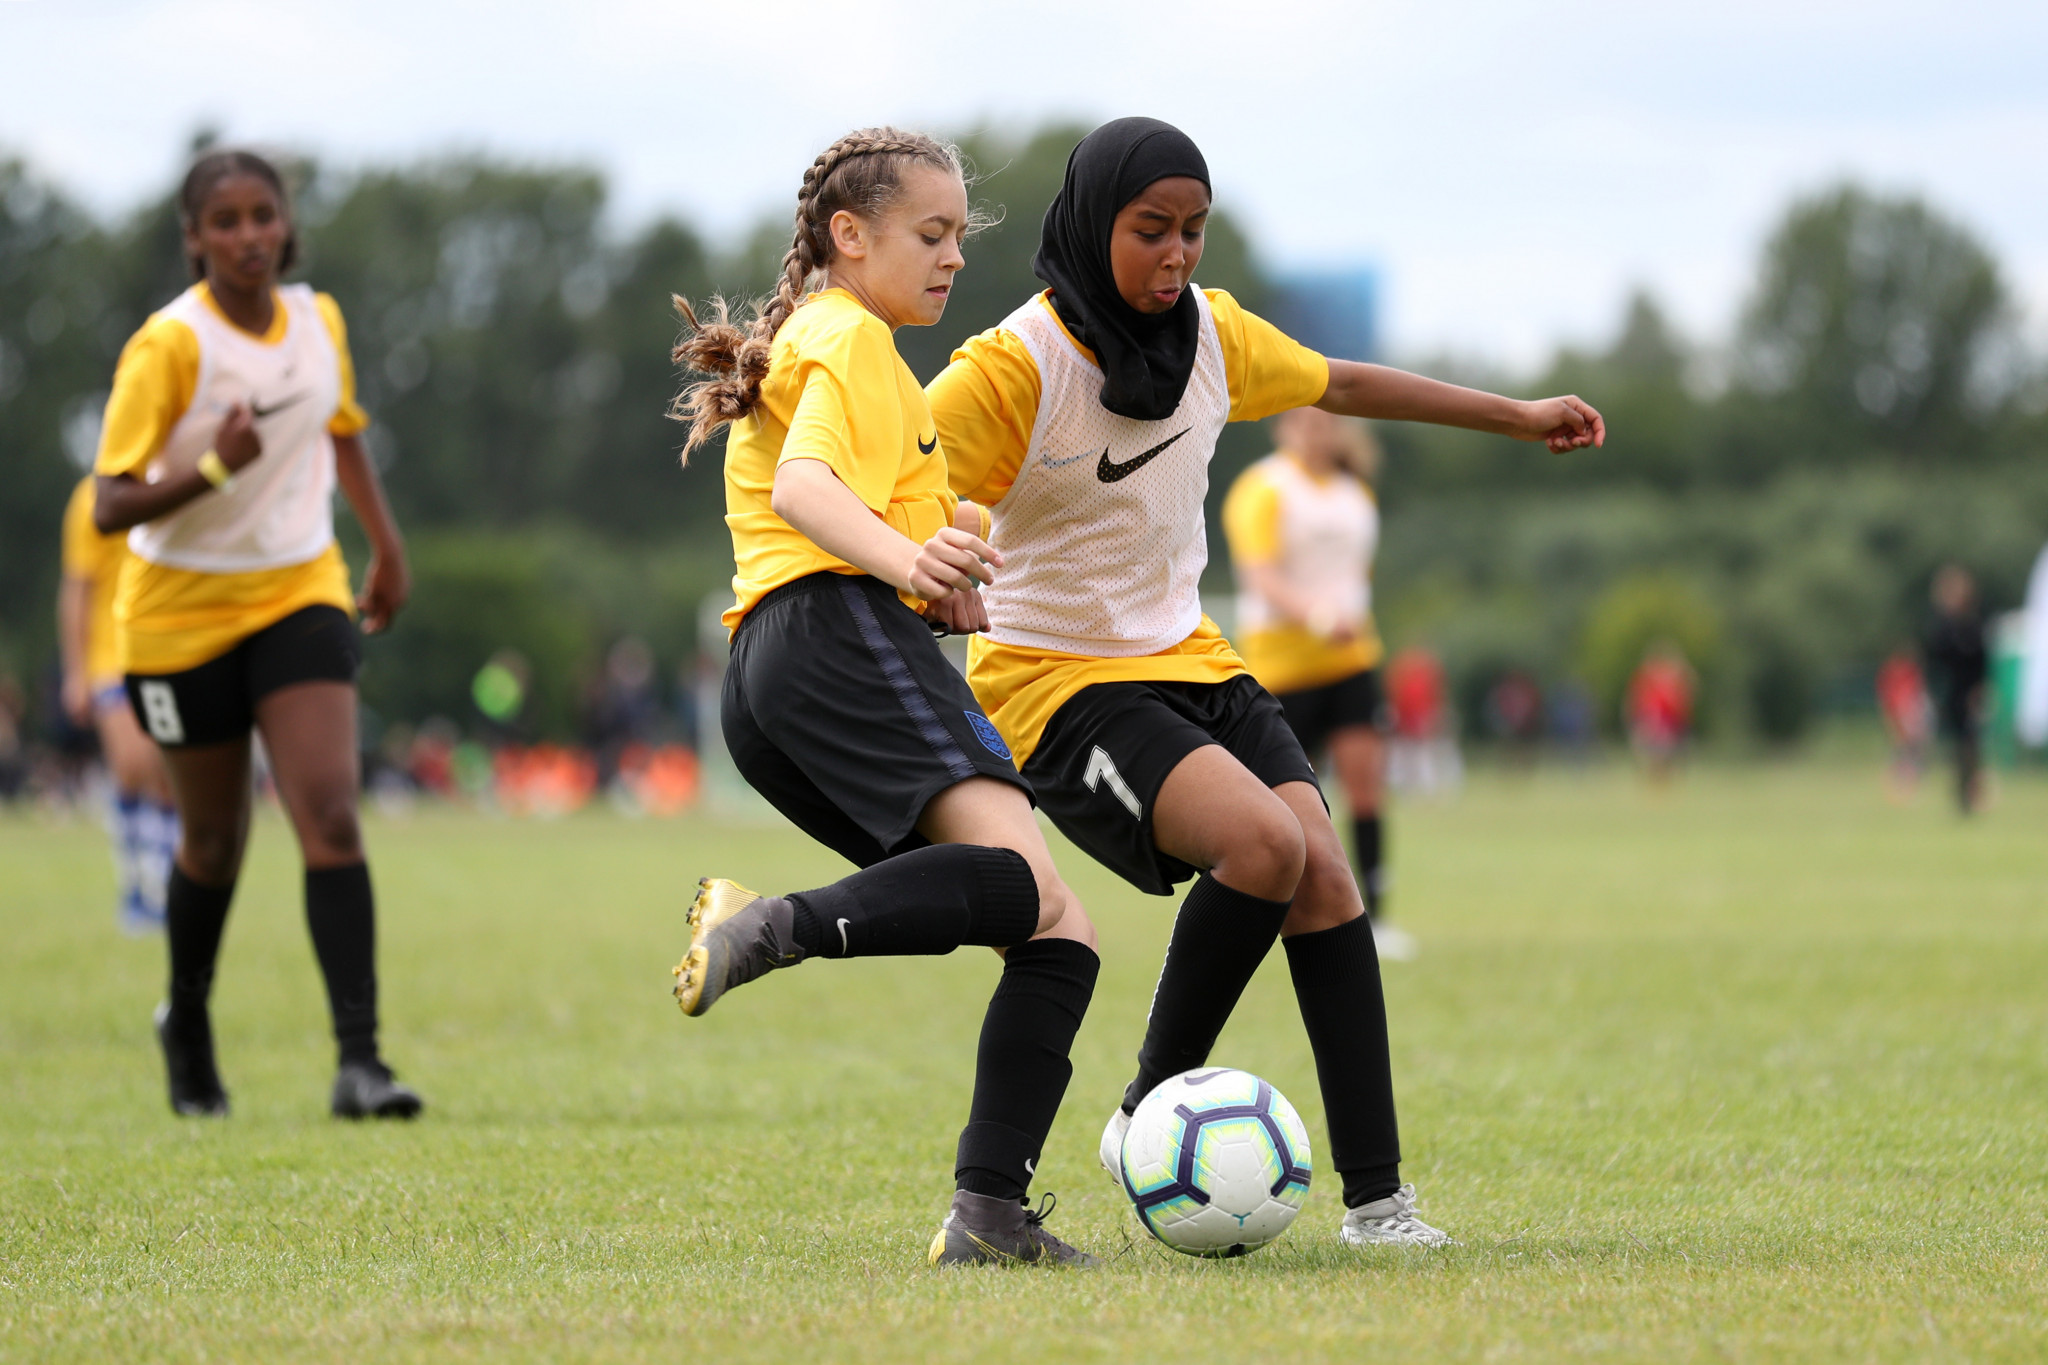 Last month, the FA pledged to give girls equal access to football at all levels ©Getty Images